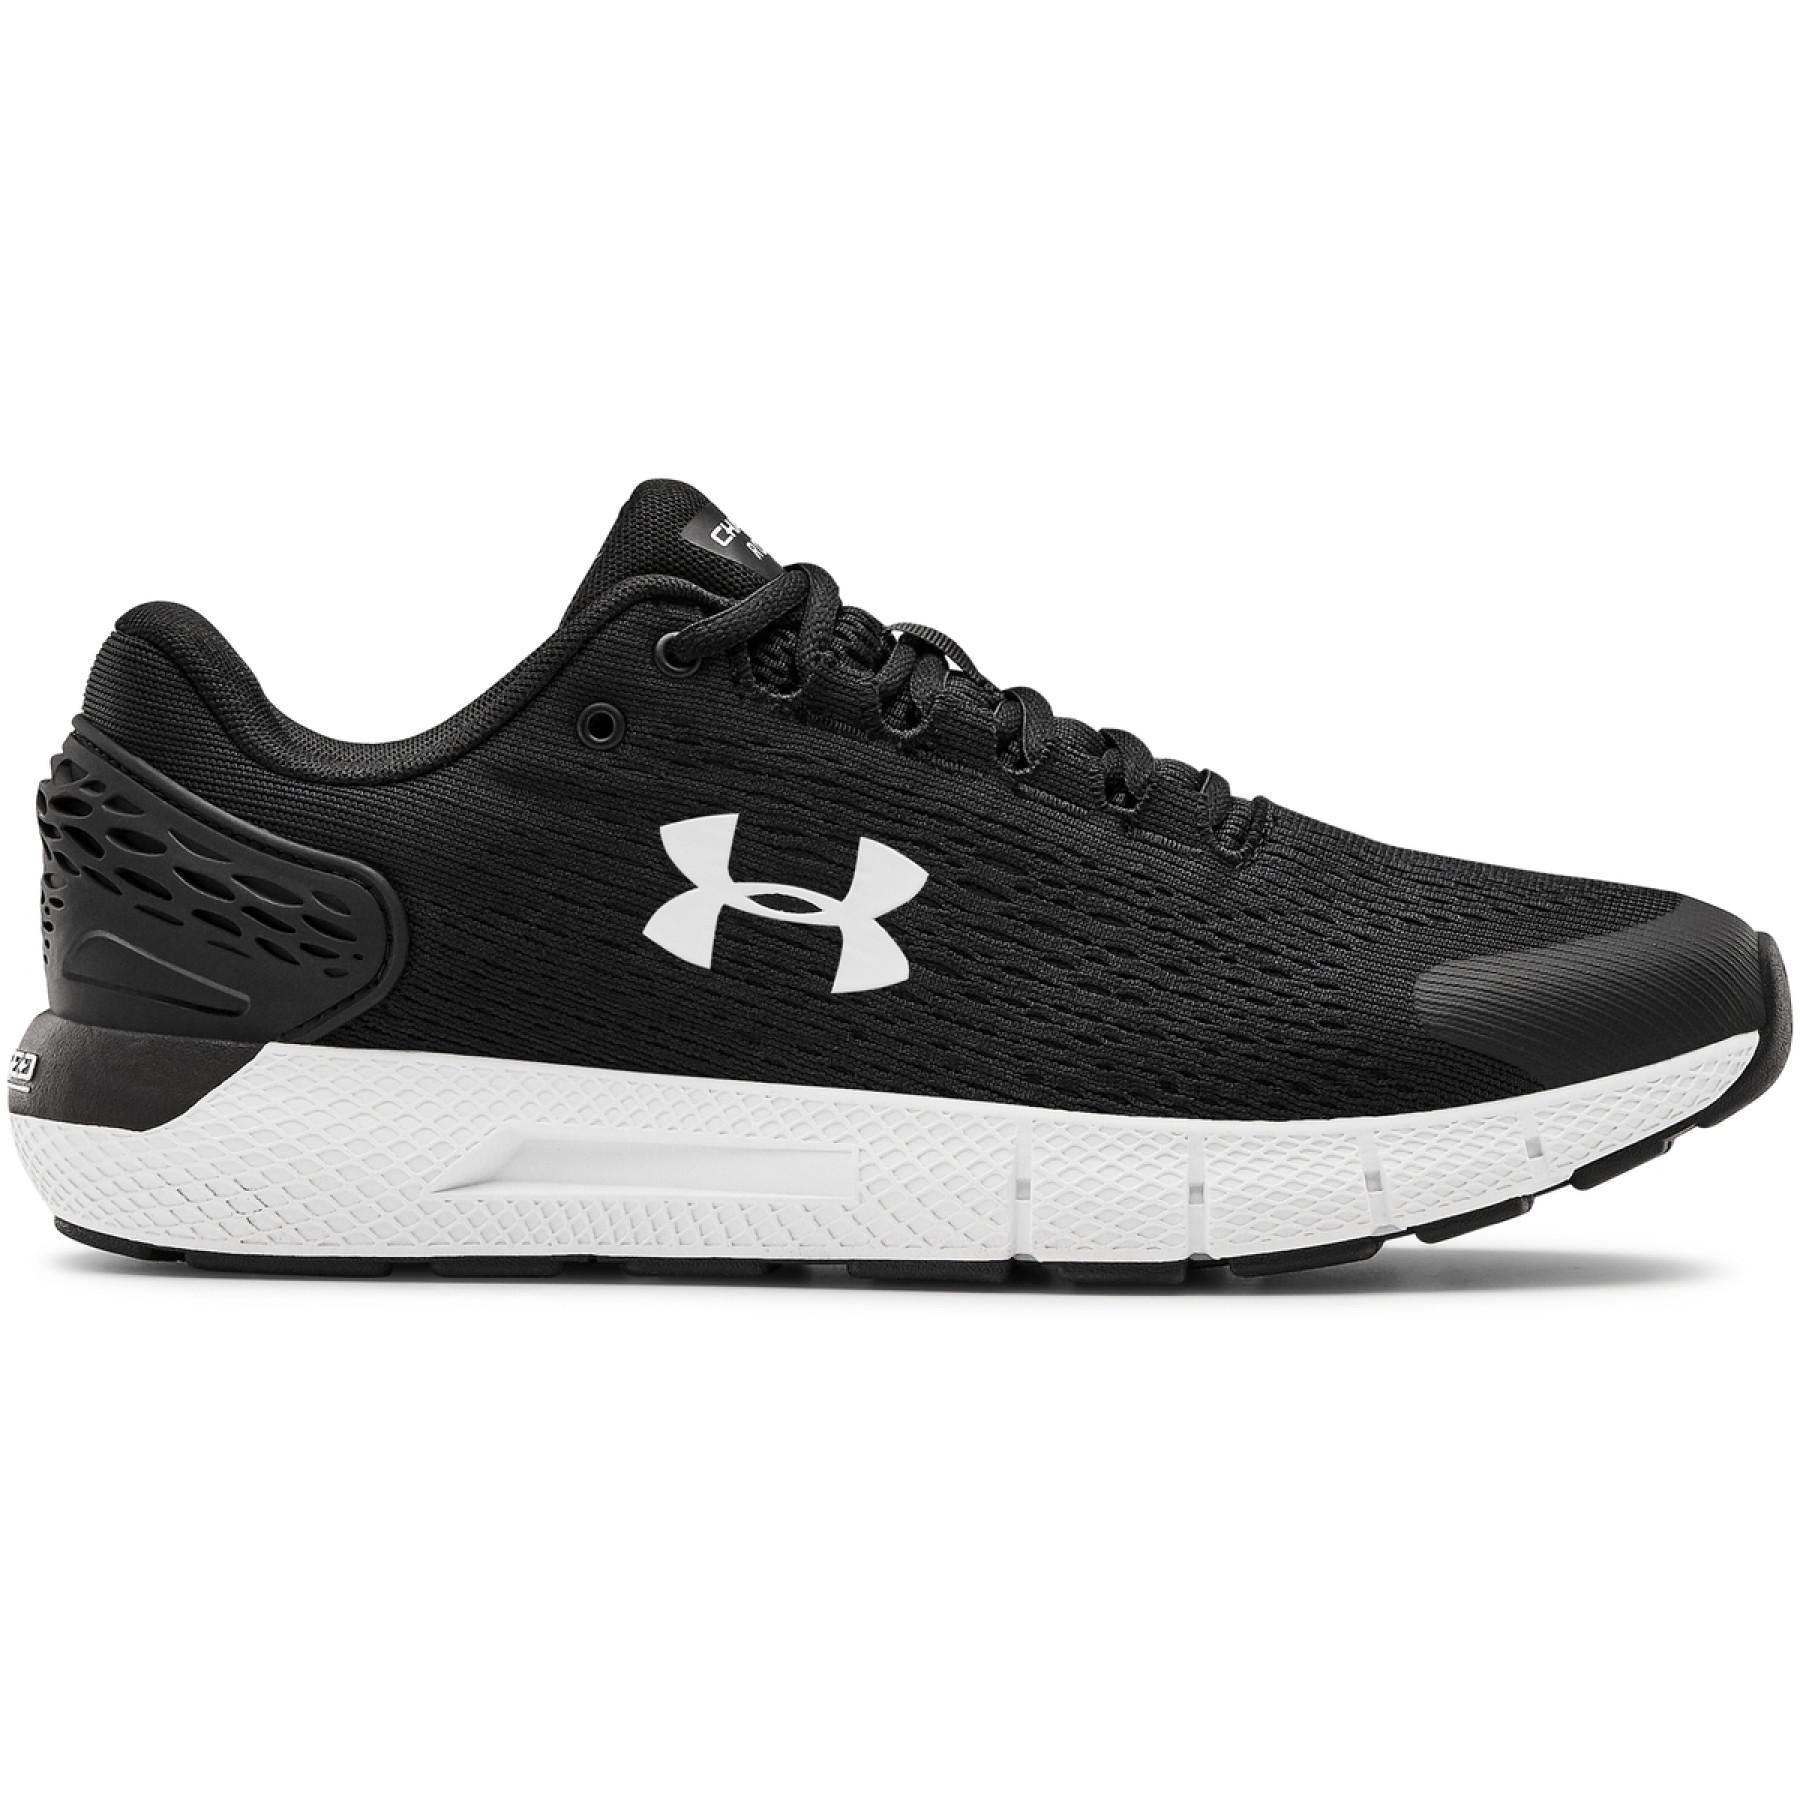 Laufschuhe Under Armour Charged Rogue 2